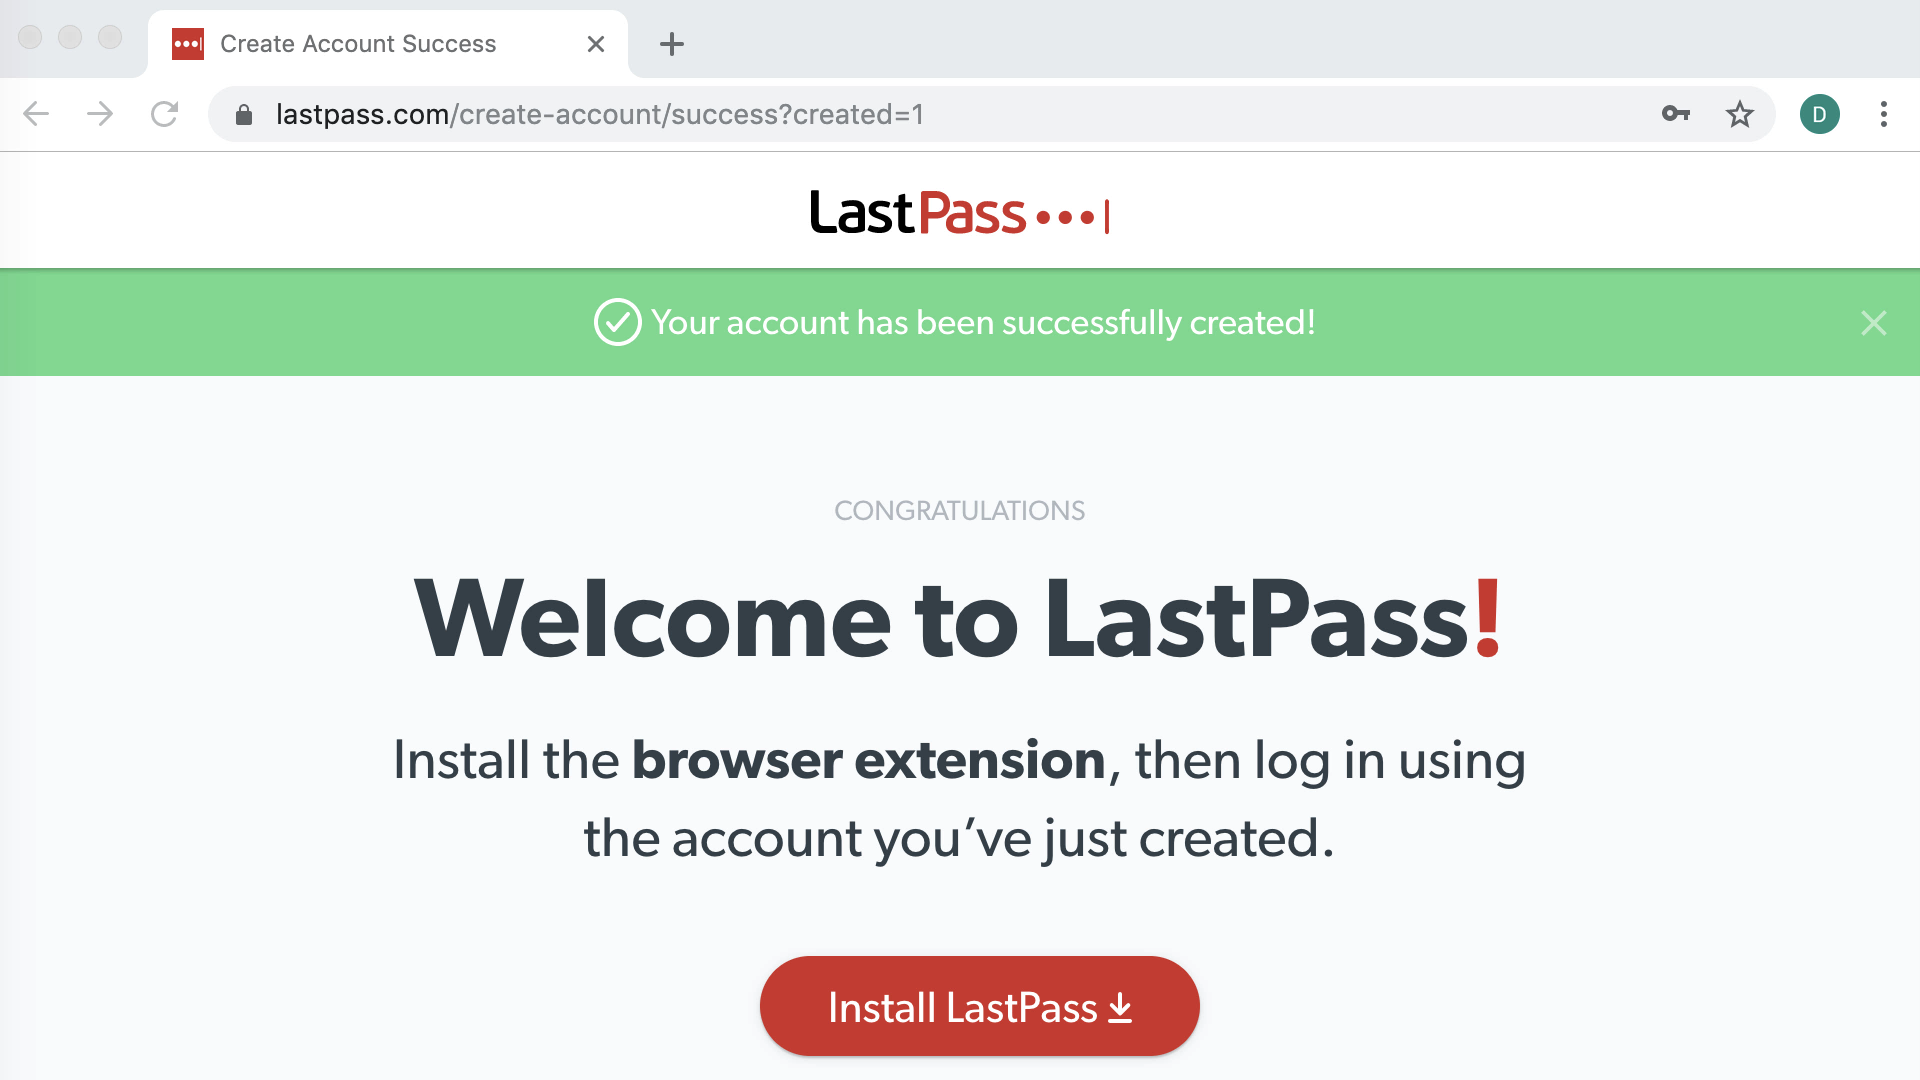 for windows instal LastPass Password Manager 4.118